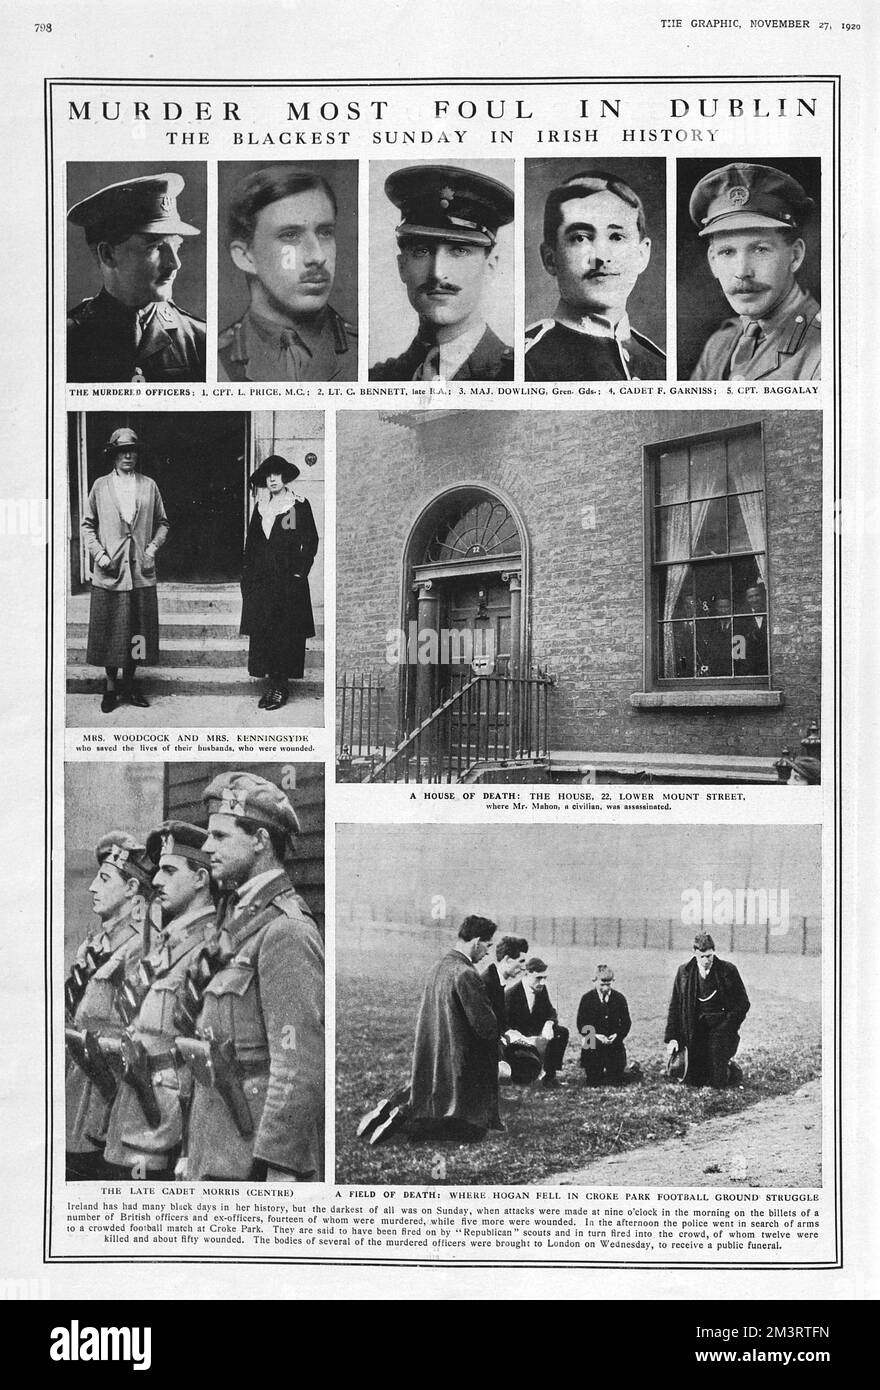 Bloody Sunday in Ireland - 20th November 1920 - portraits of murdered British officers (14 in total were killed). In the afternoon of the 20th, police went to Croke Park to search for arms at a crowded football match - having been fired upon by Republican scouts and returned fire into the crowd, killing 12 and injuring 50. The other images on the page show the Late Cadet Morris (lower left), the house on 22 Lower Mount Street where Mrs Mahon, a civilian, was murdered and Mrs Woodcock and Mrs Kenningsyde who saved the lives of their husbands who were injured.     Date: 1920 Stock Photo